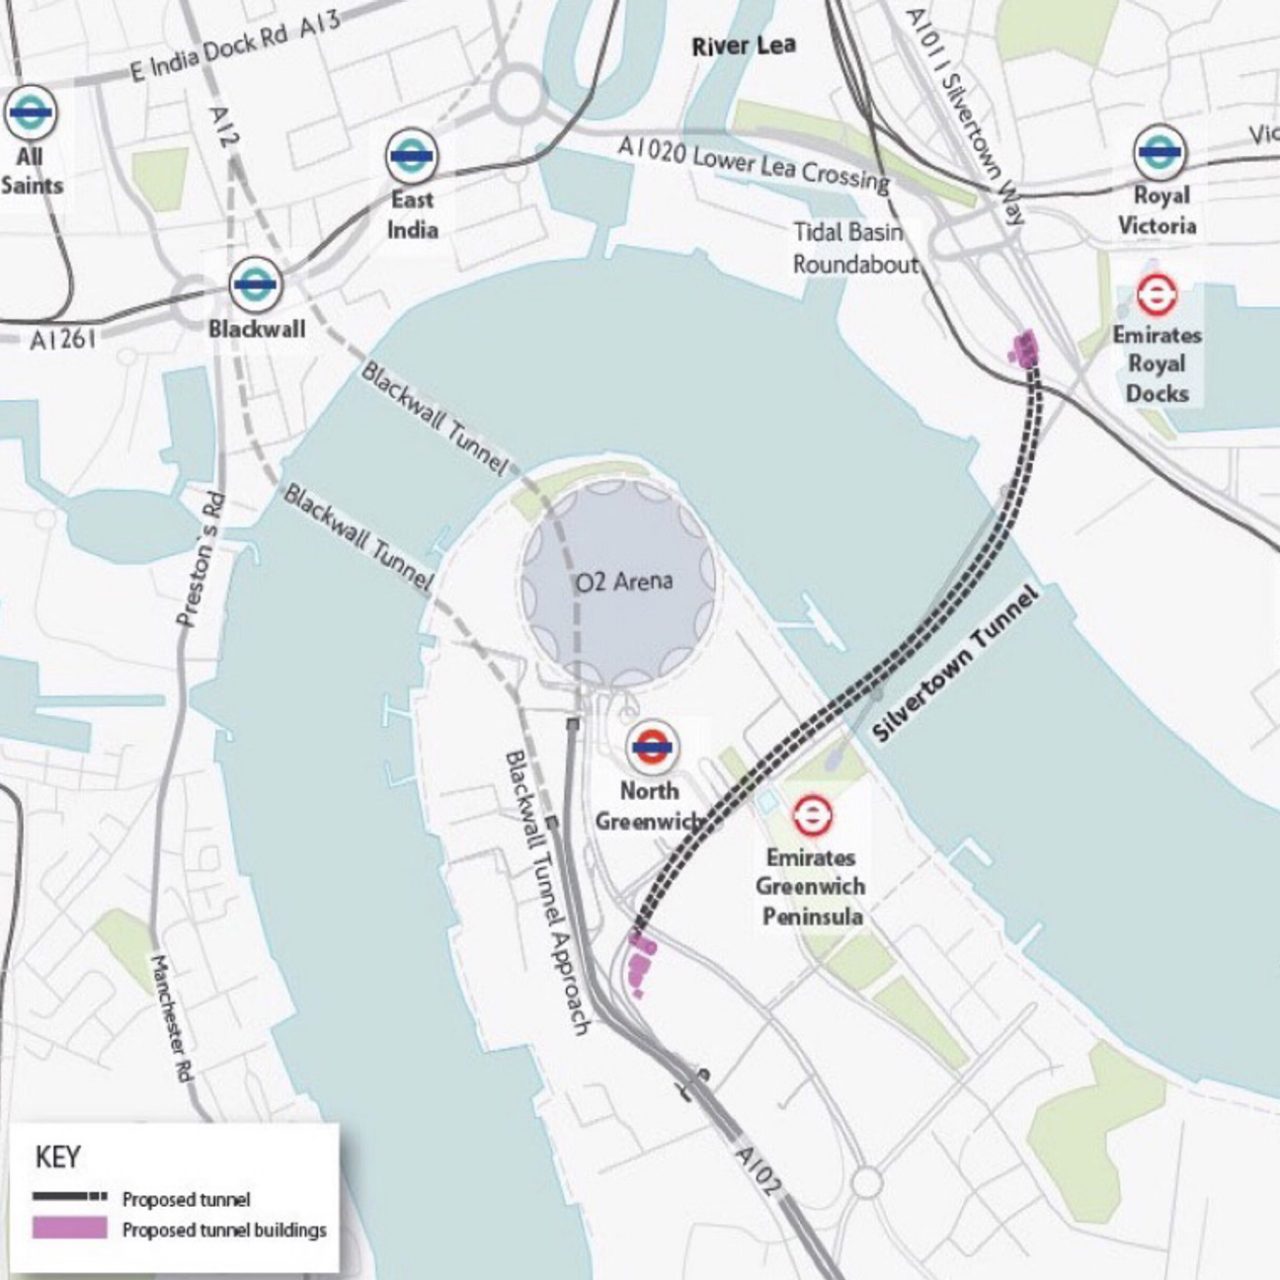 Map showing the proposed tunnel under the River Thames in East London